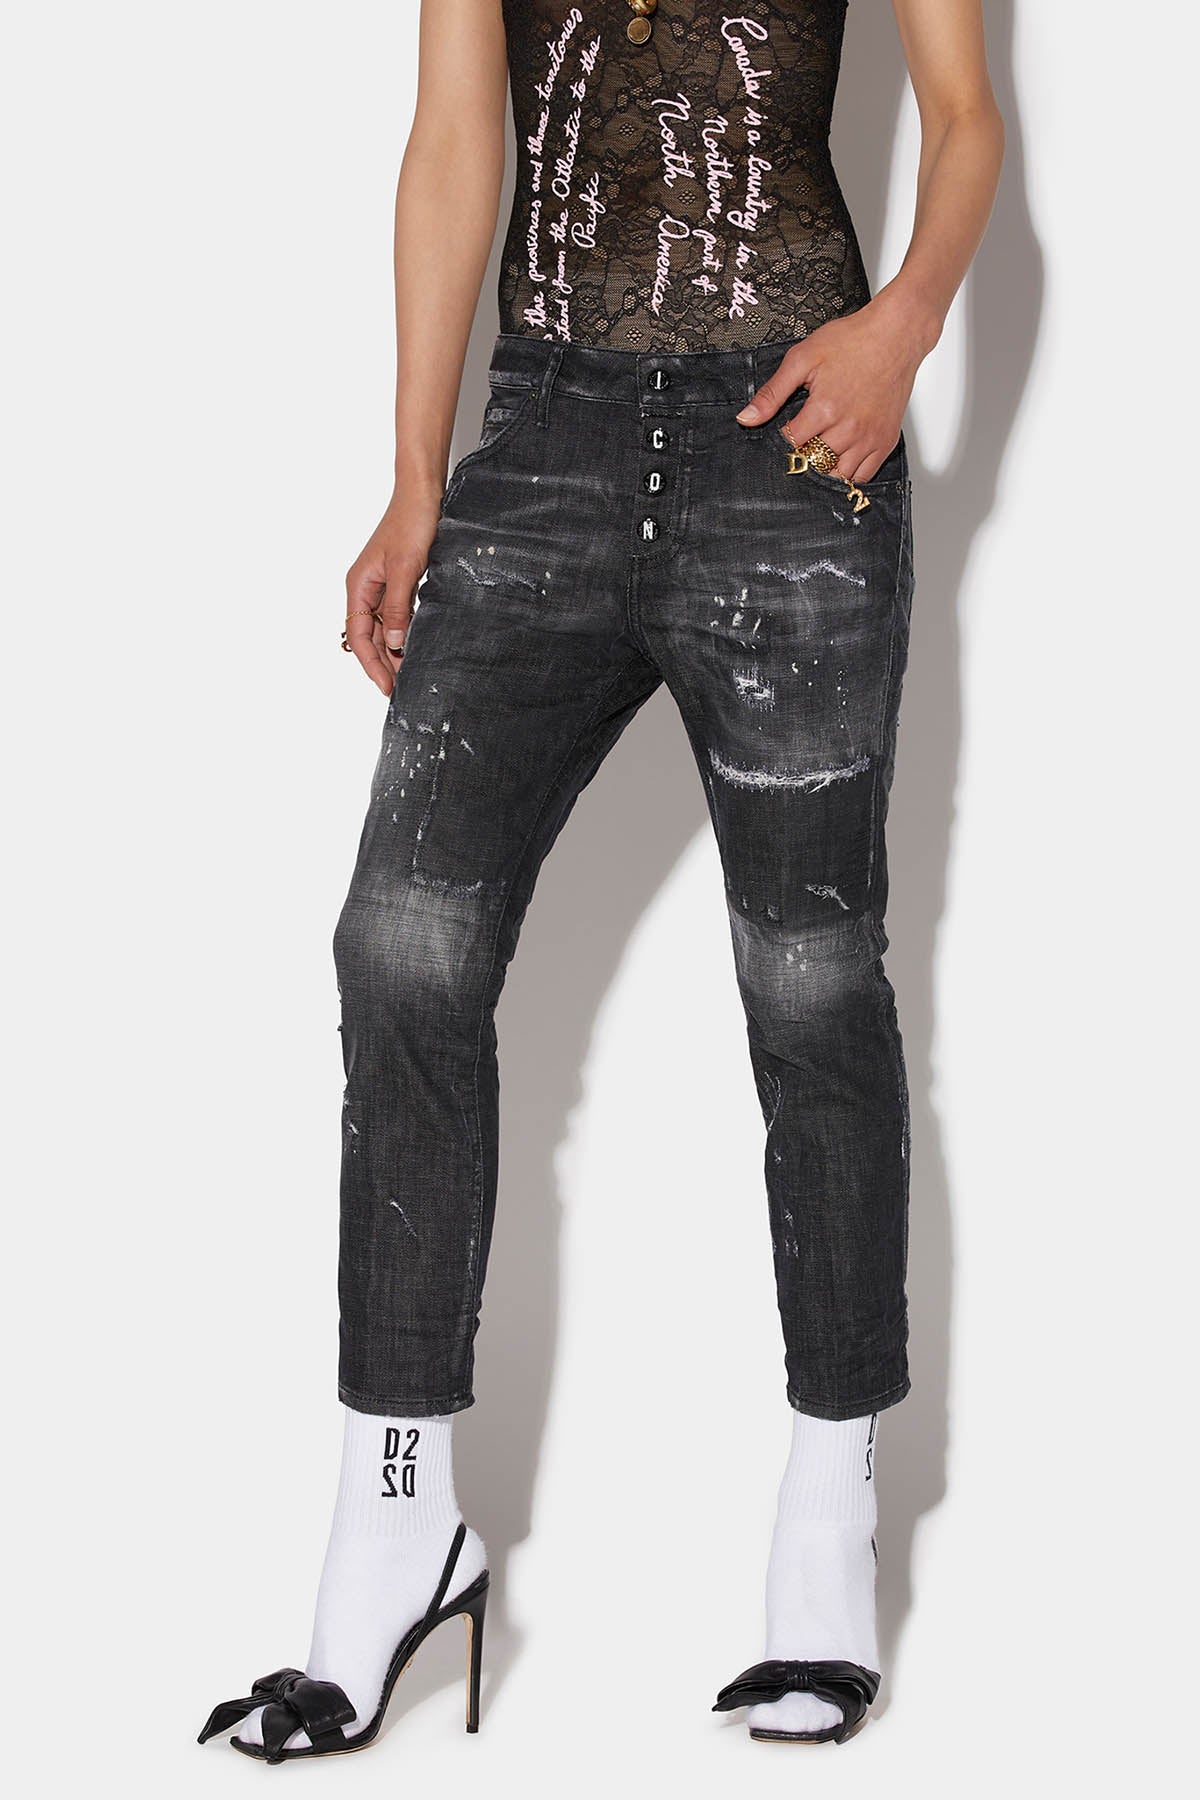 Dsquared Cool Girl Cropped Streç Jeans-Libas Trendy Fashion Store